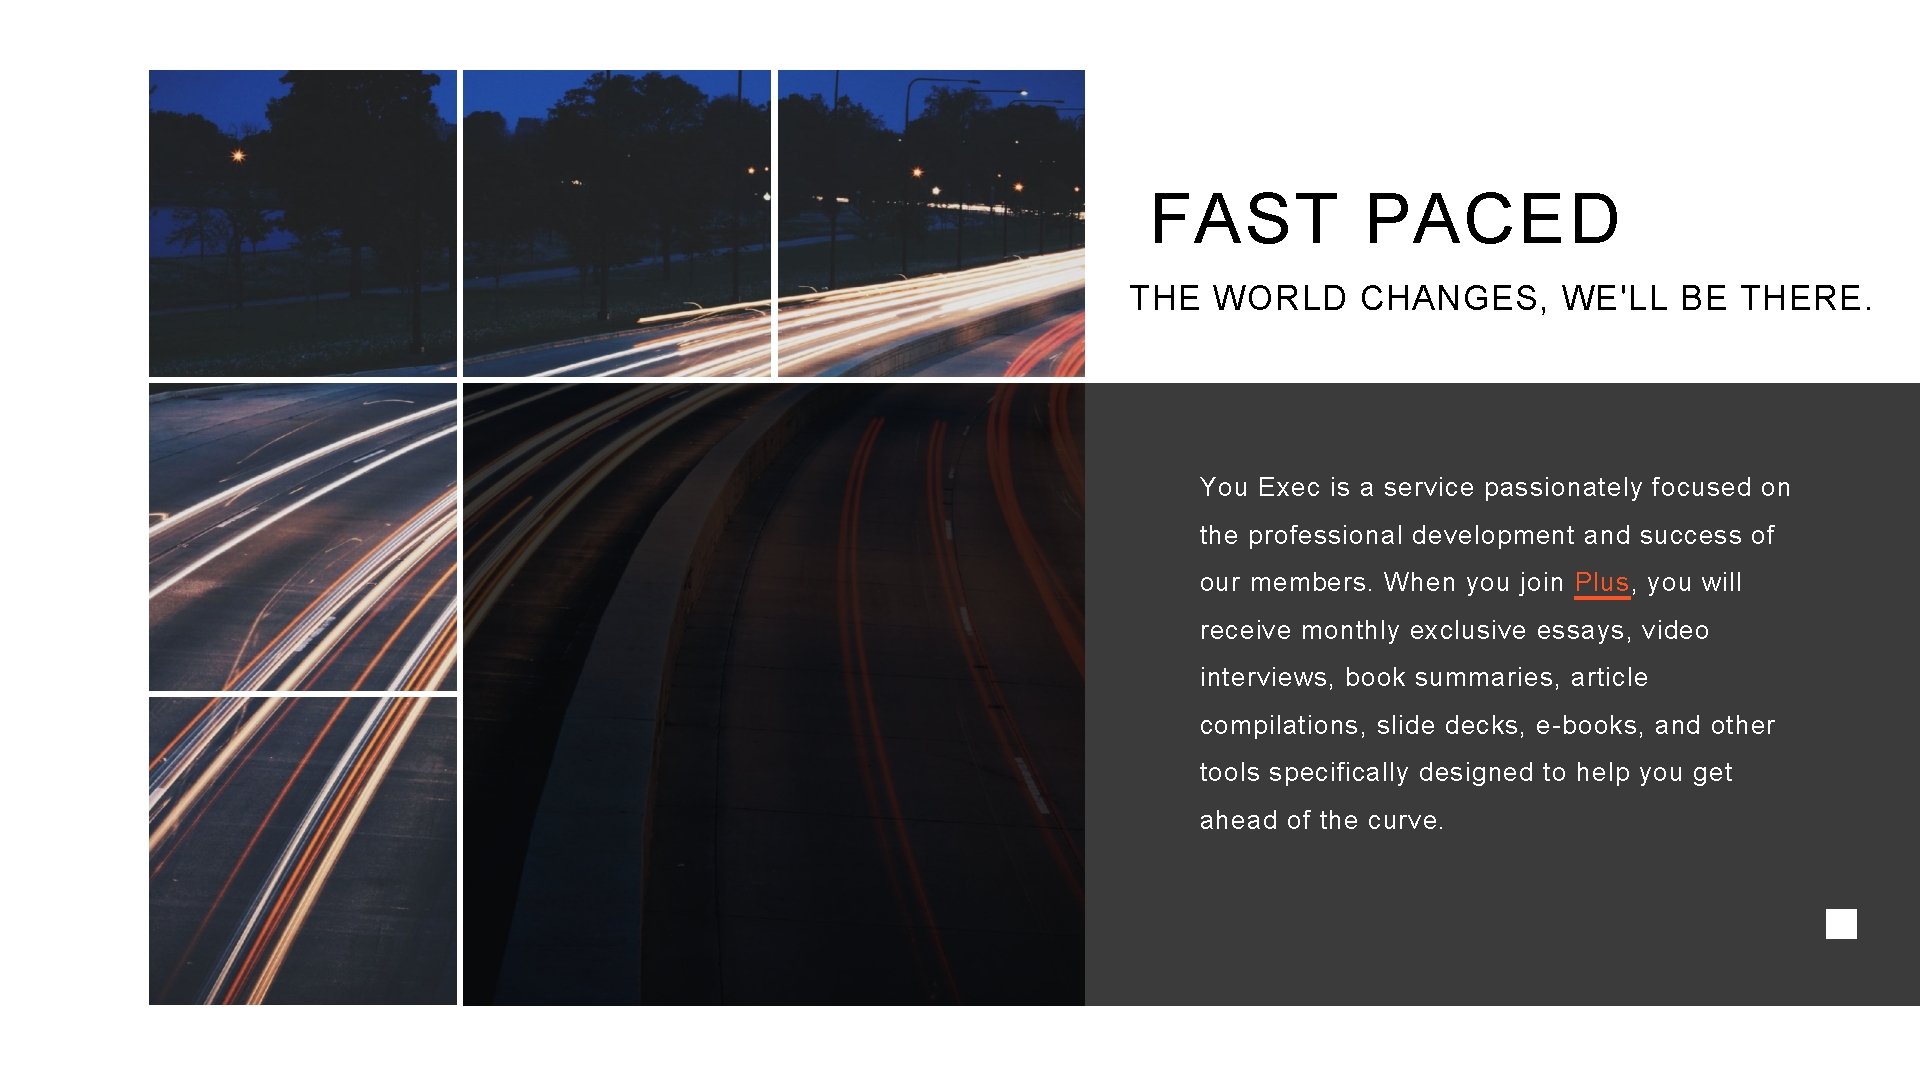 FAST PACED THE WORLD CHANGES, WE'LL BE THERE. You Exec is a service passionately